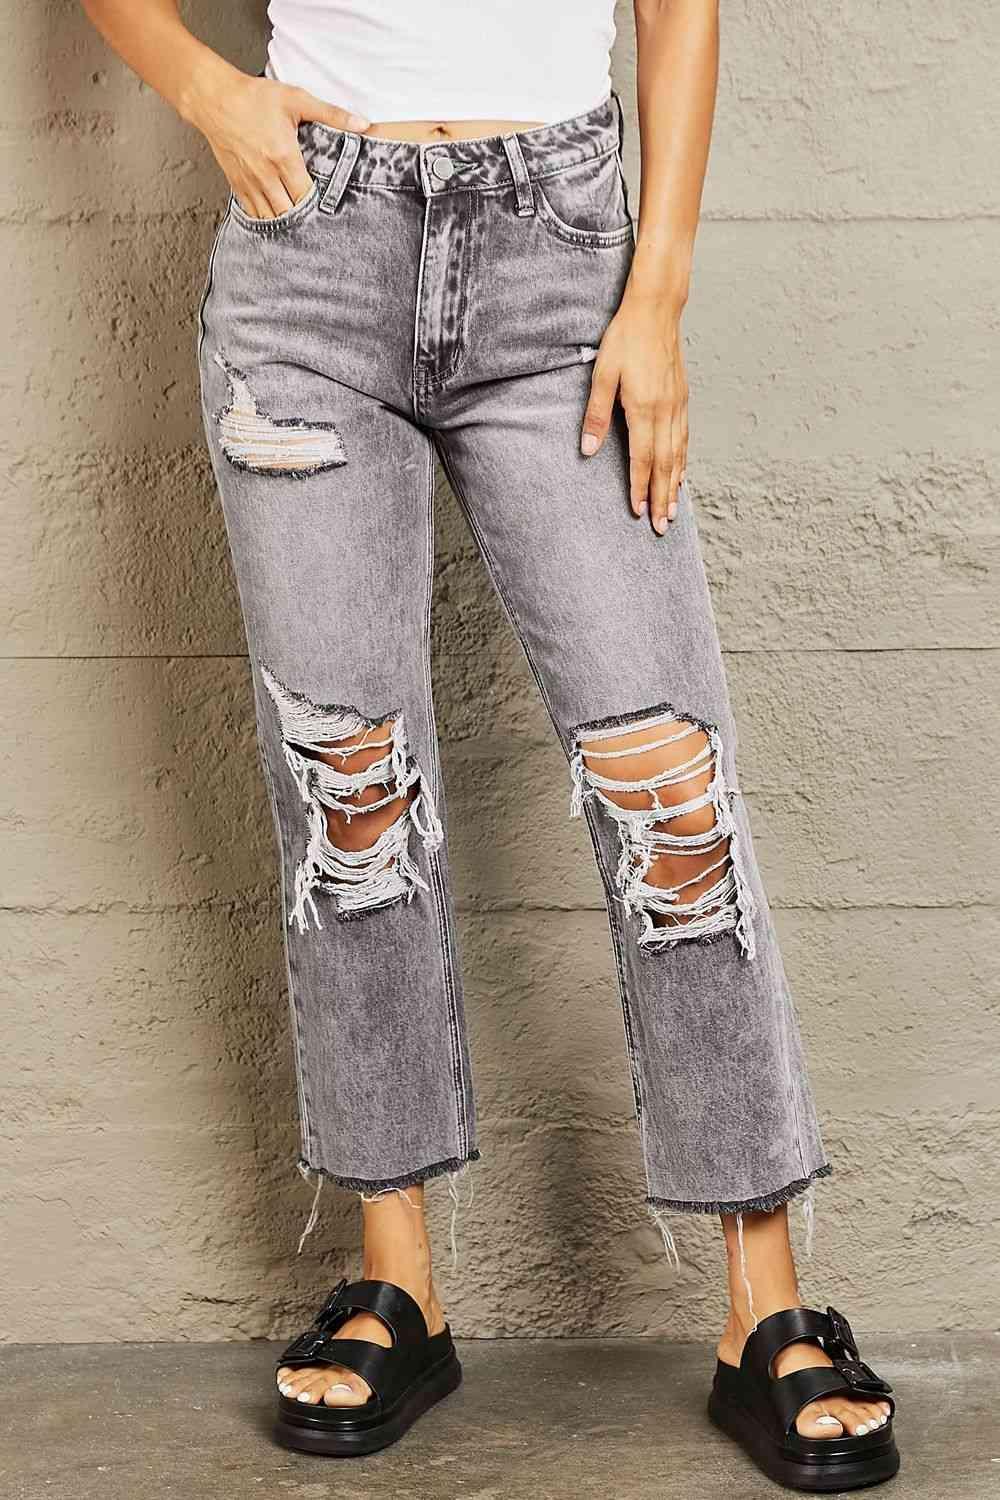 Chic And Edgy Mid Rise Cropped Ripped Jeans - MXSTUDIO.COM